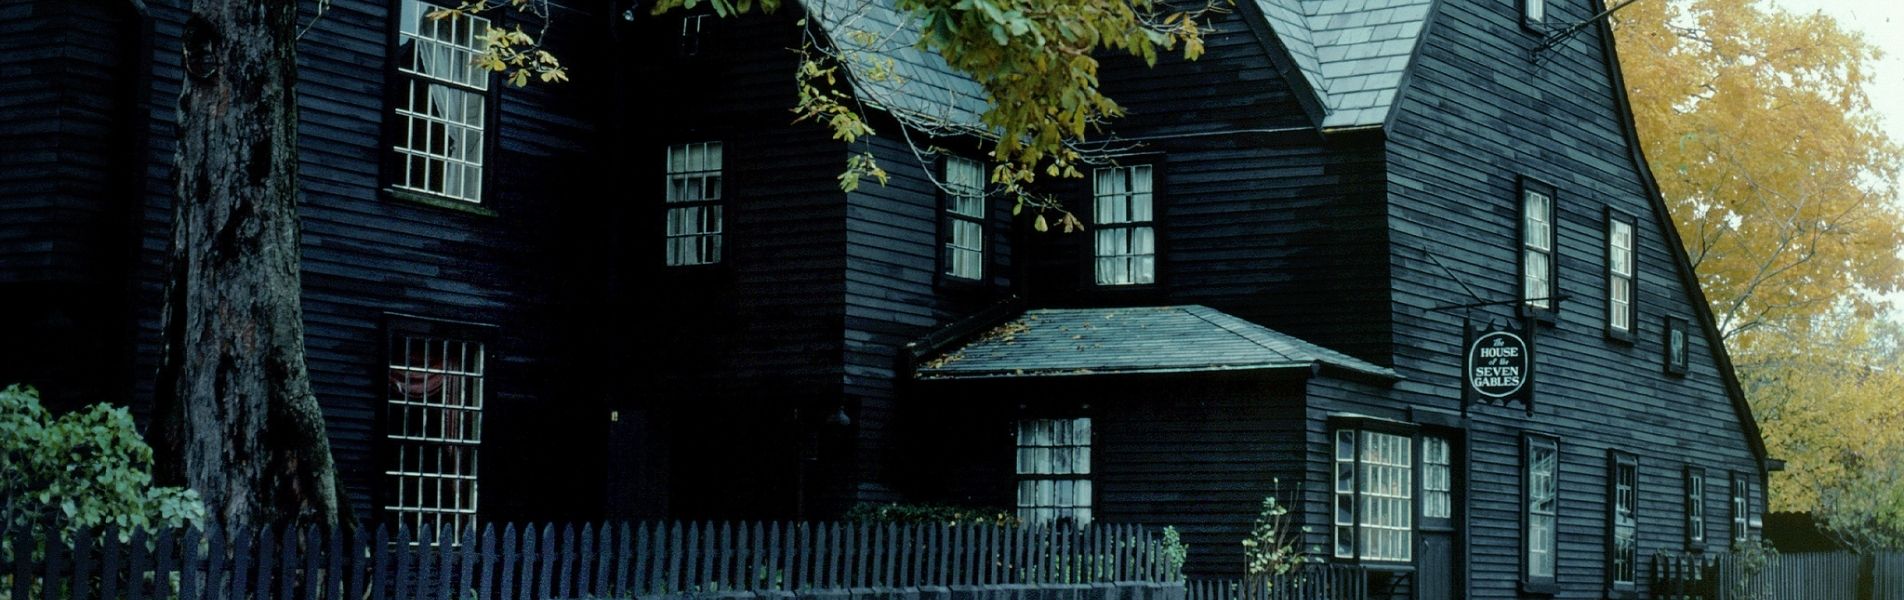 things to do in salem, haunted happenings, destination salem